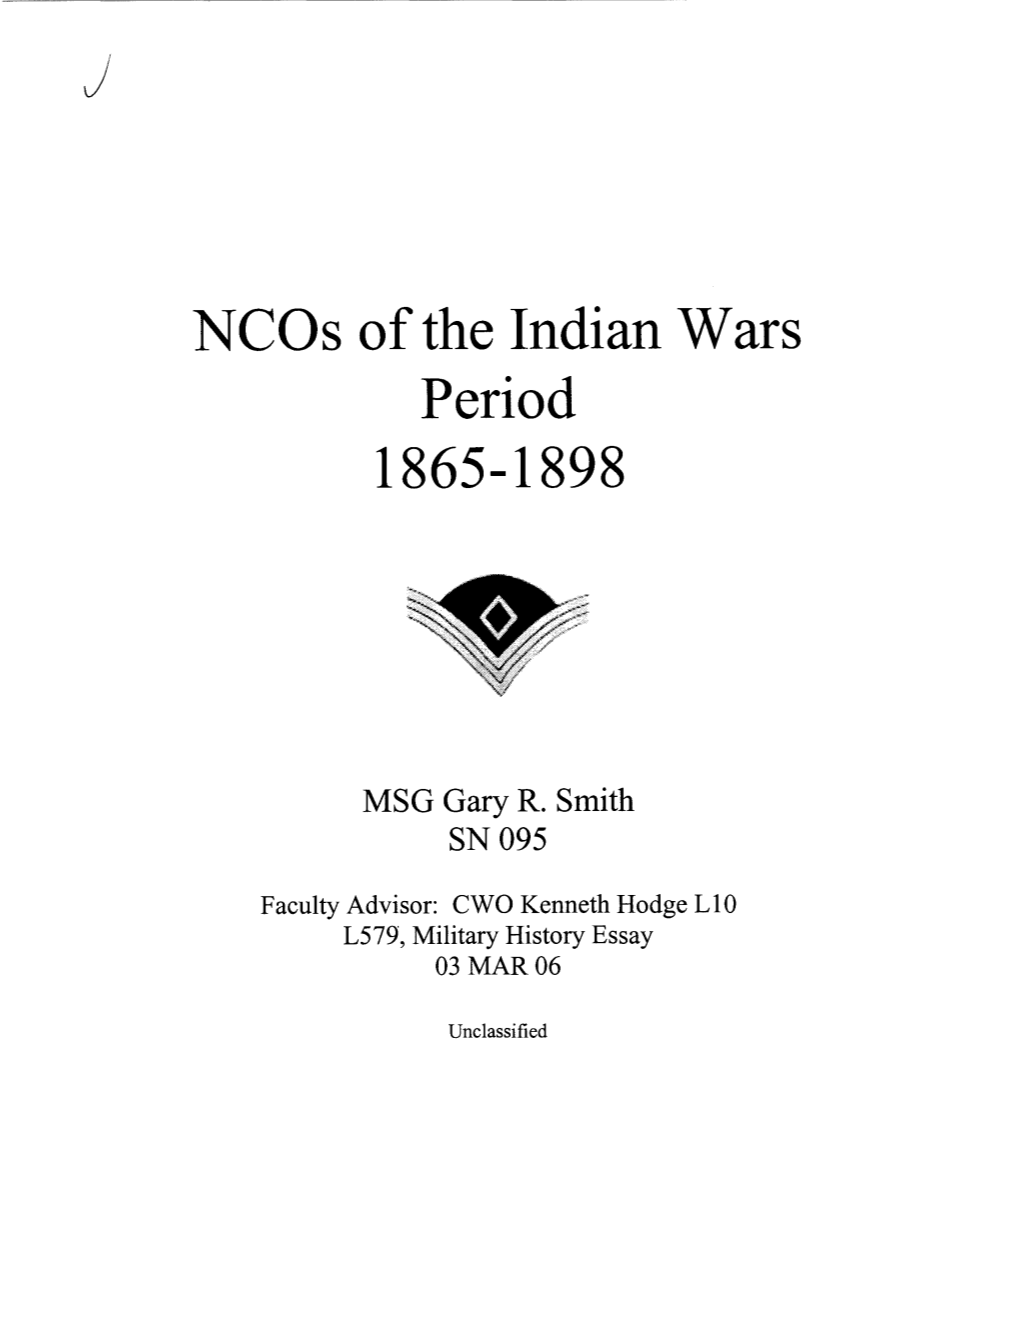 Of the Indian Wars Period 1865-1898